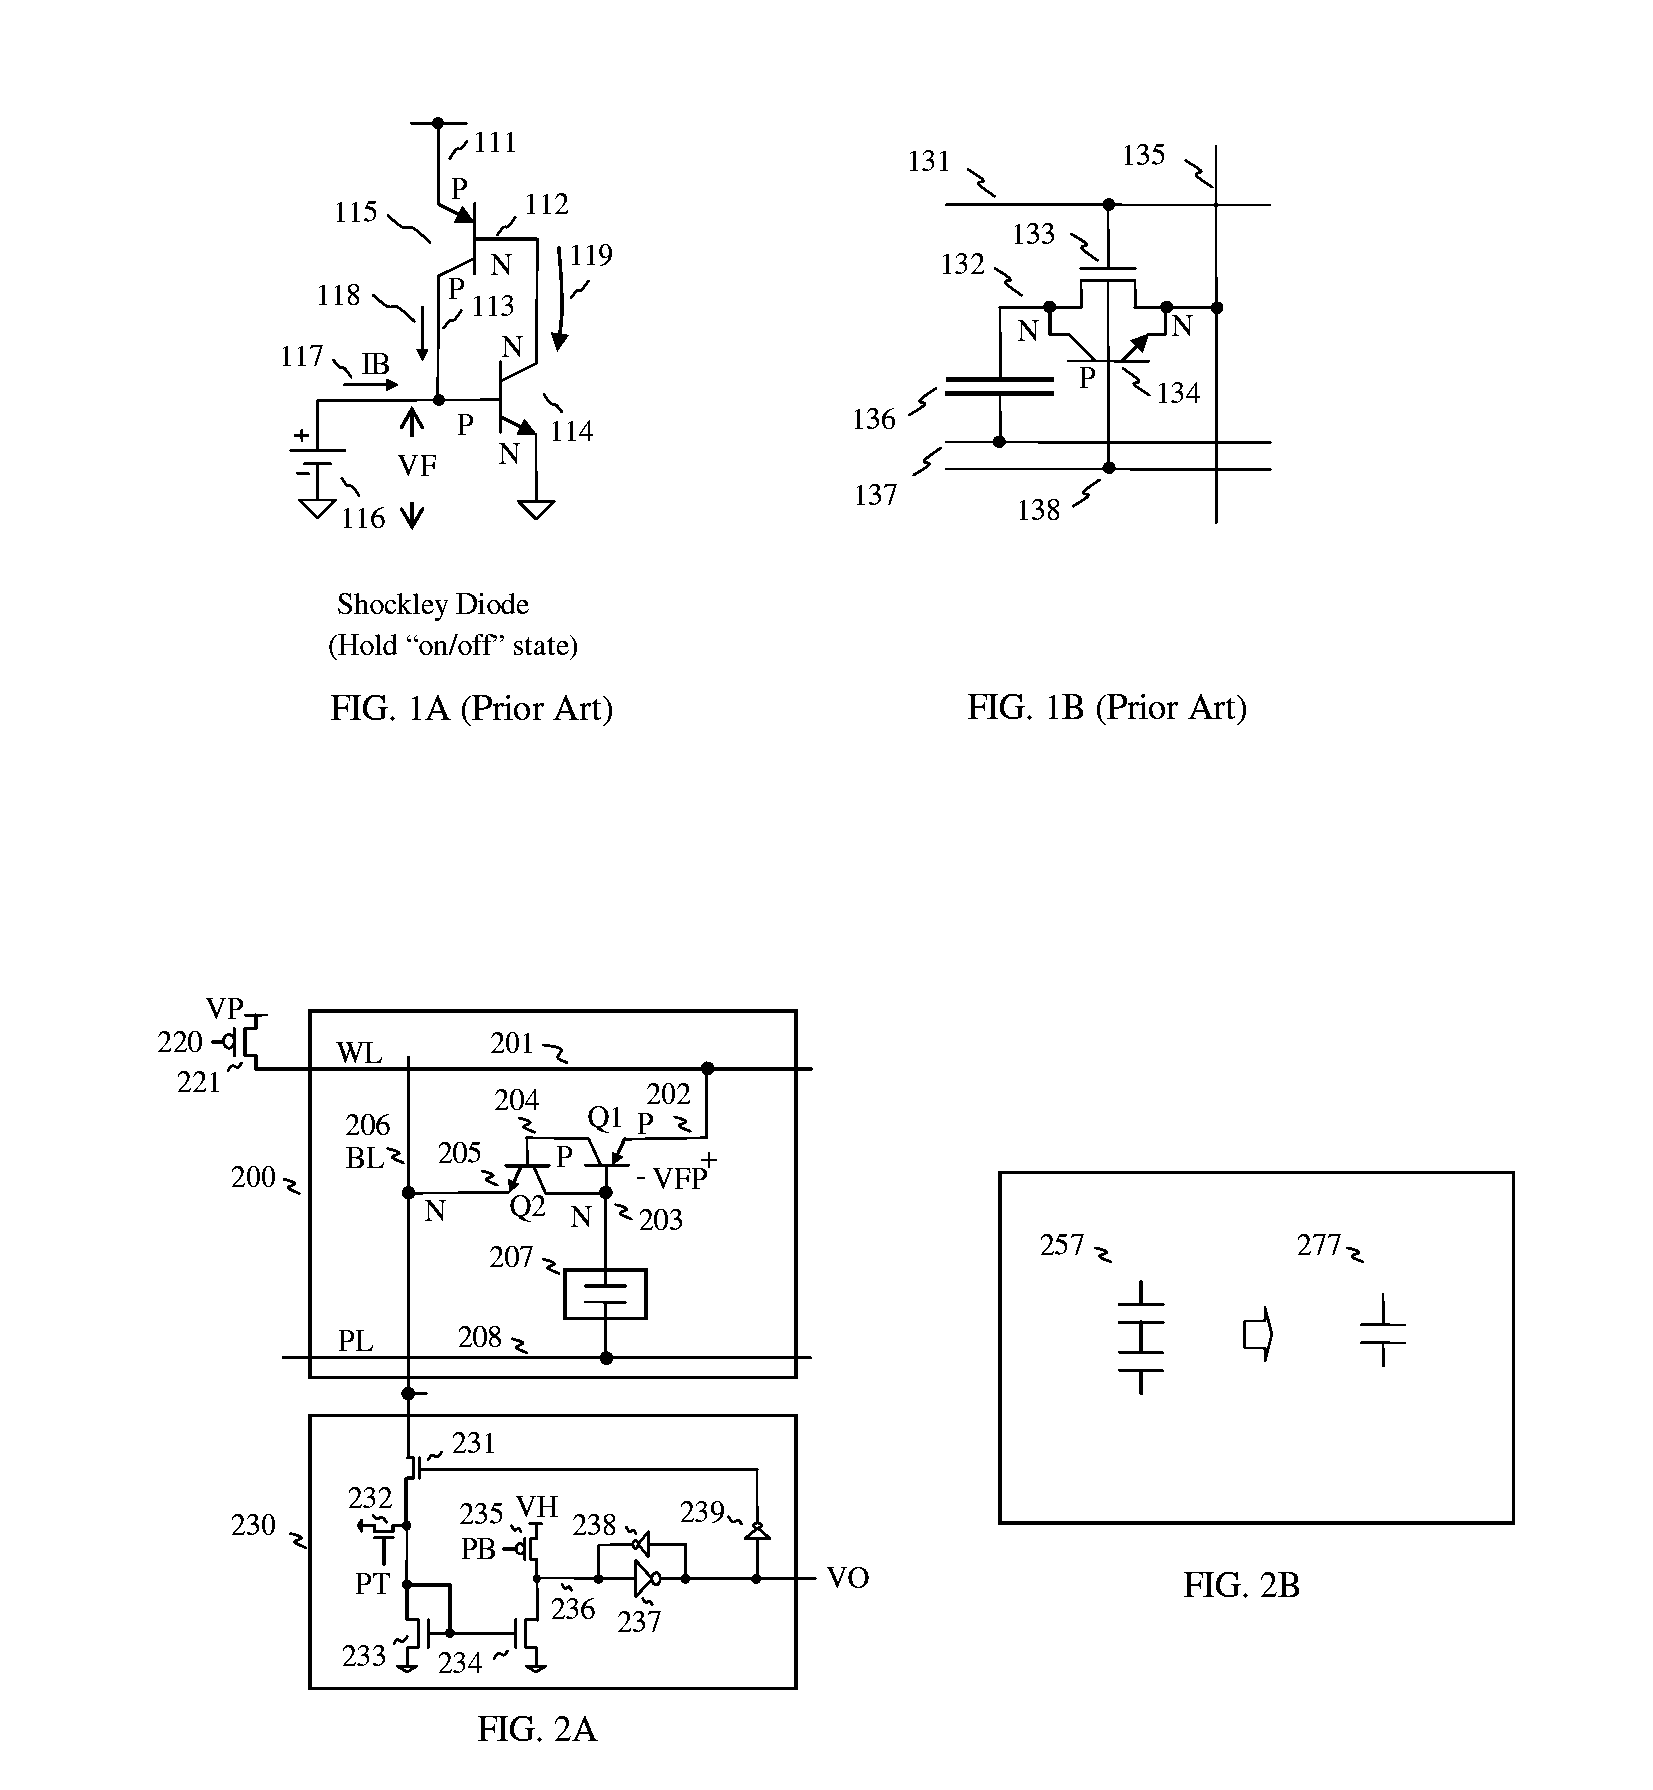 Stacked capacitor memory